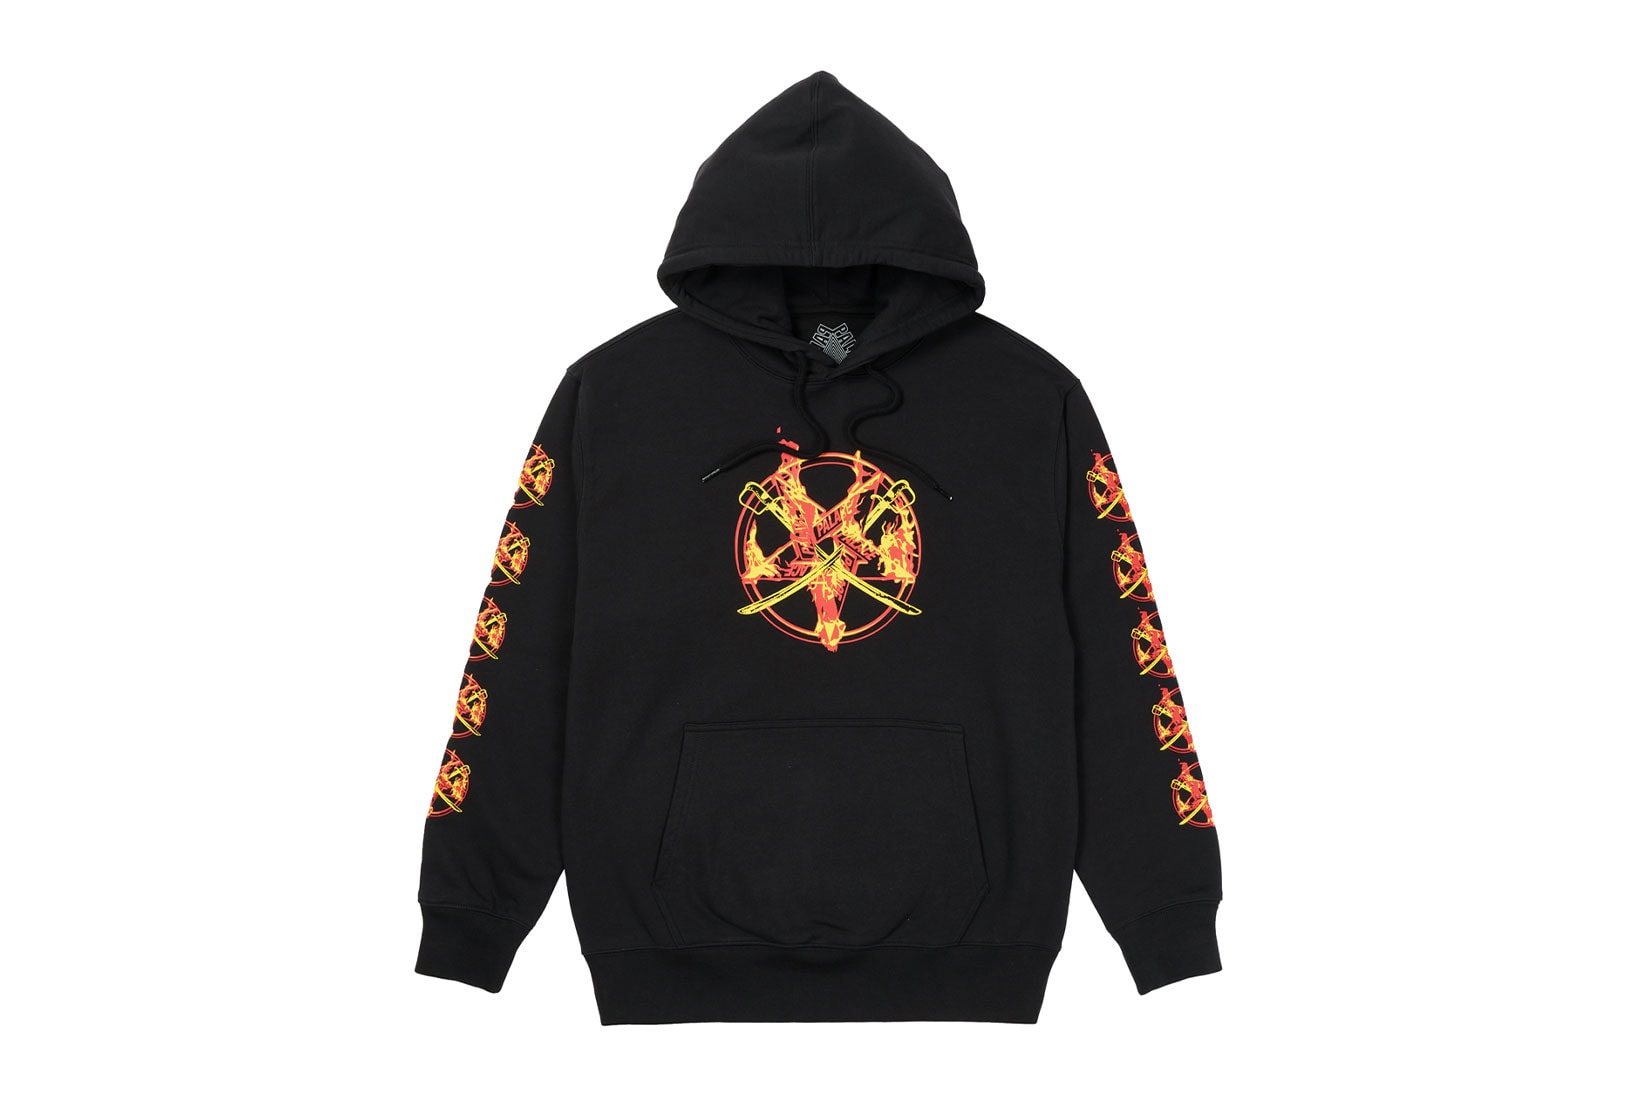 Palace Skateboards Autumn Drop 6 Hoodie Graphic